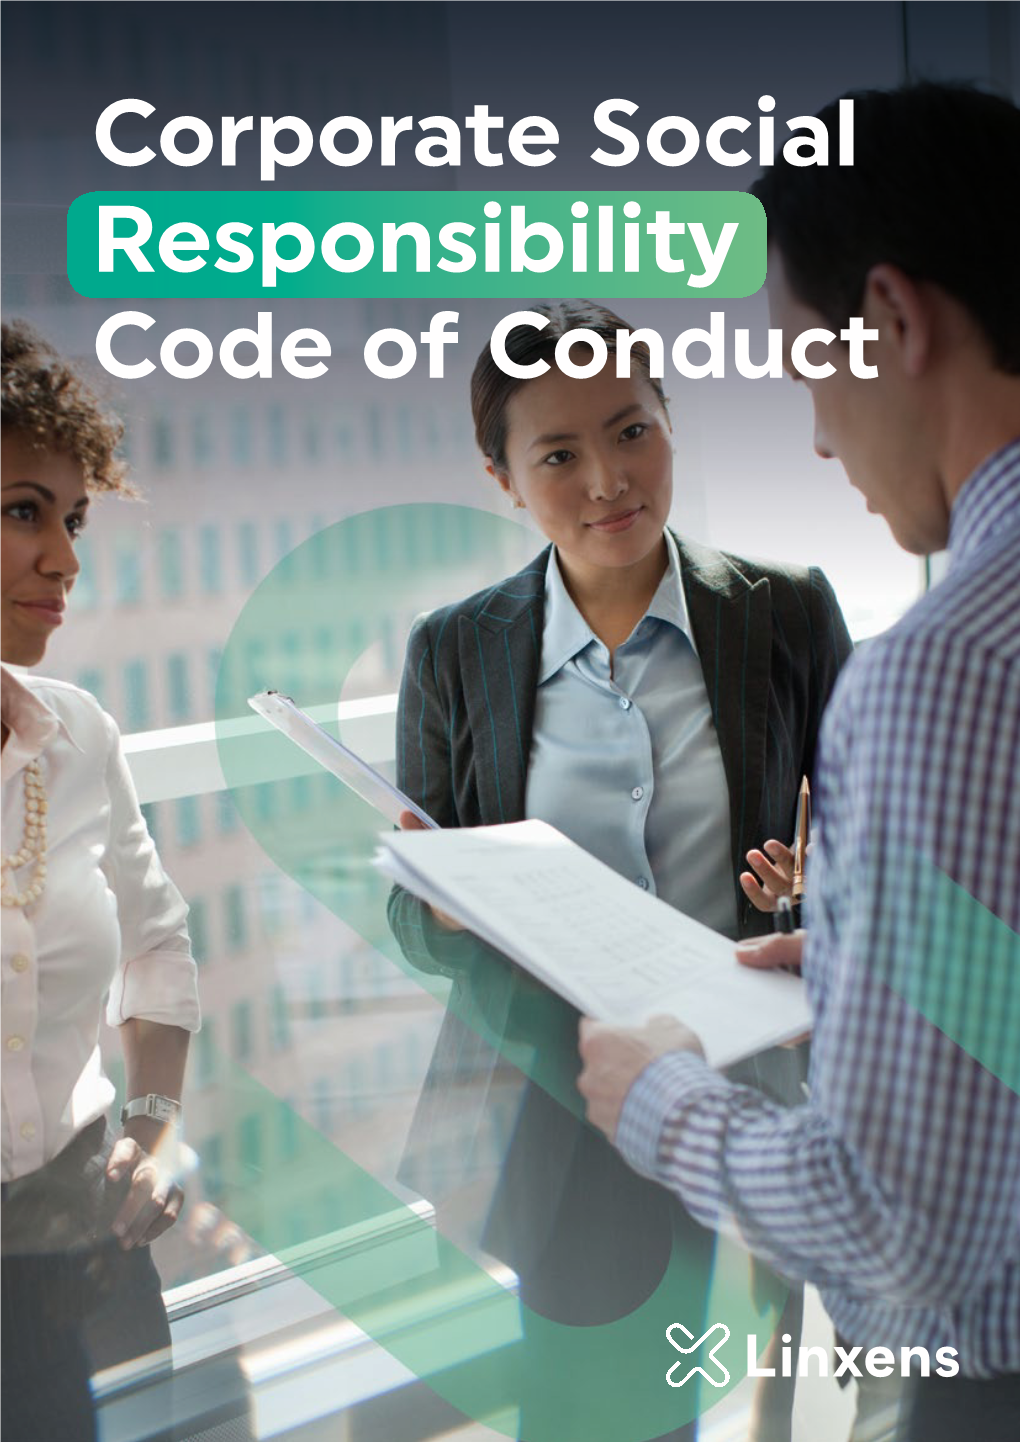 Corporate Social Responsibility Code of Conduct Corporate Social Responsibility Code of Conduct